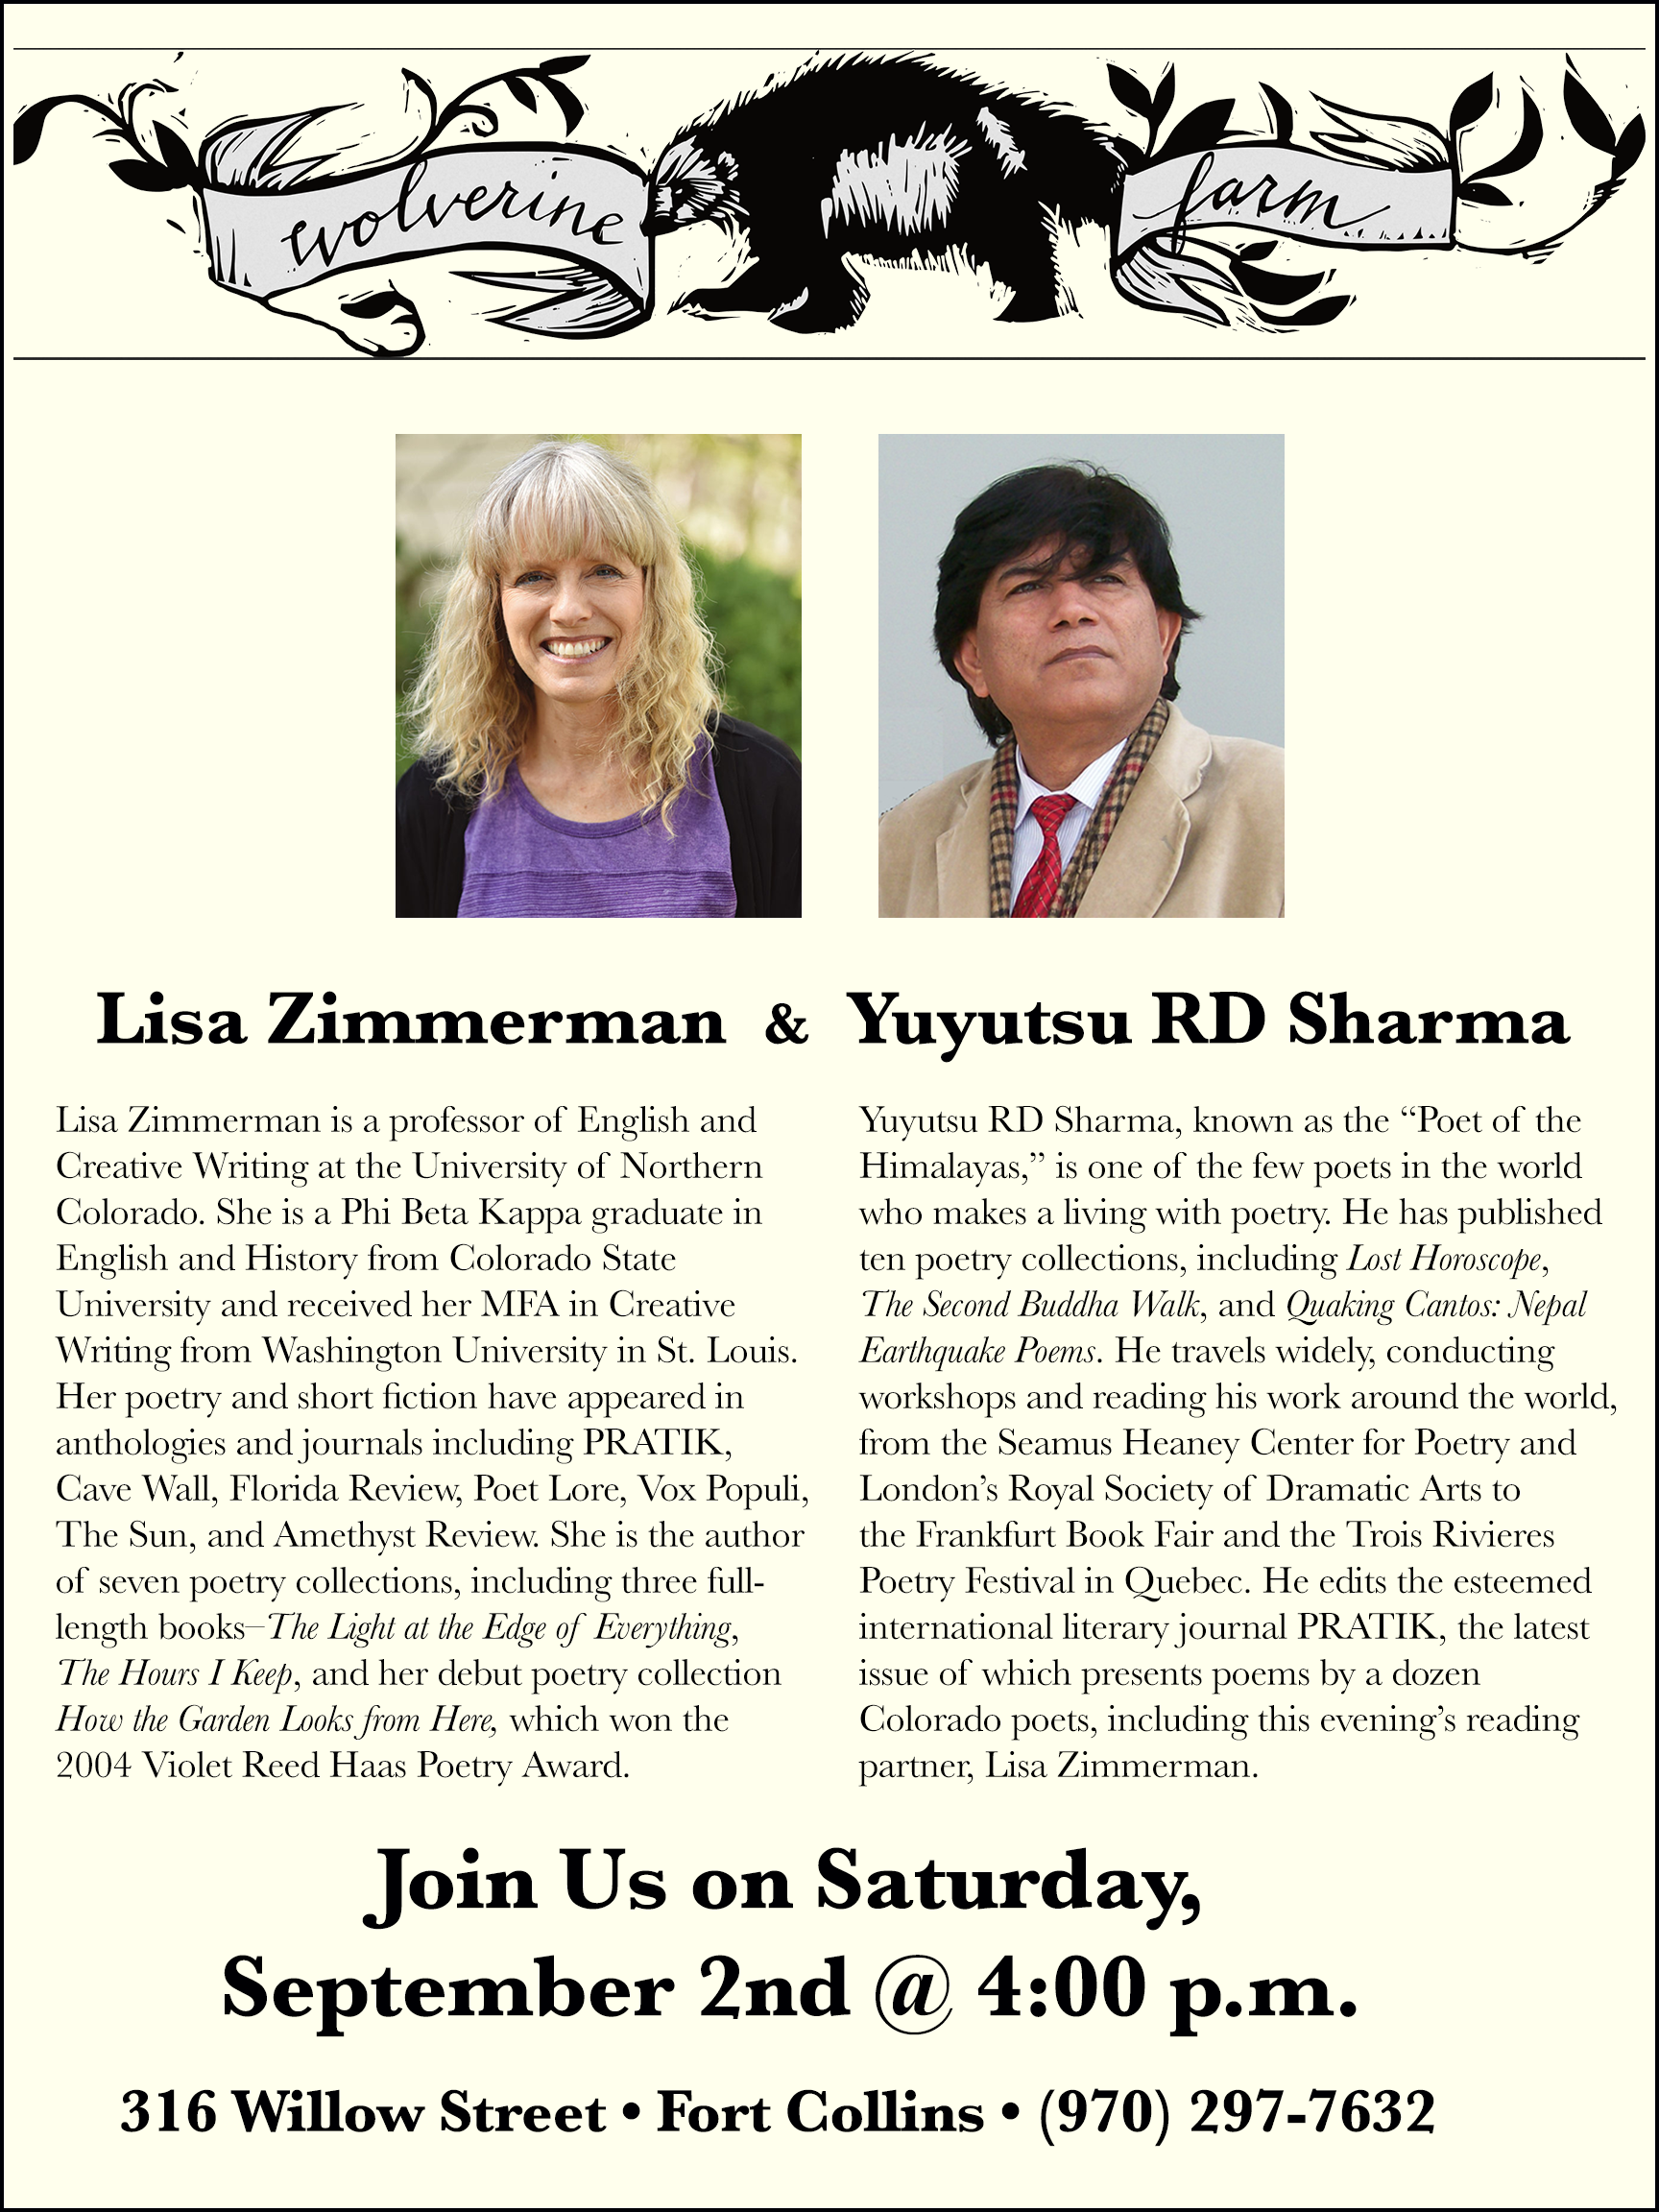 Yuyutsu Sharma and Lisa Zimmerman at Wolverine Farm in Fort Collins on 9-2-2023